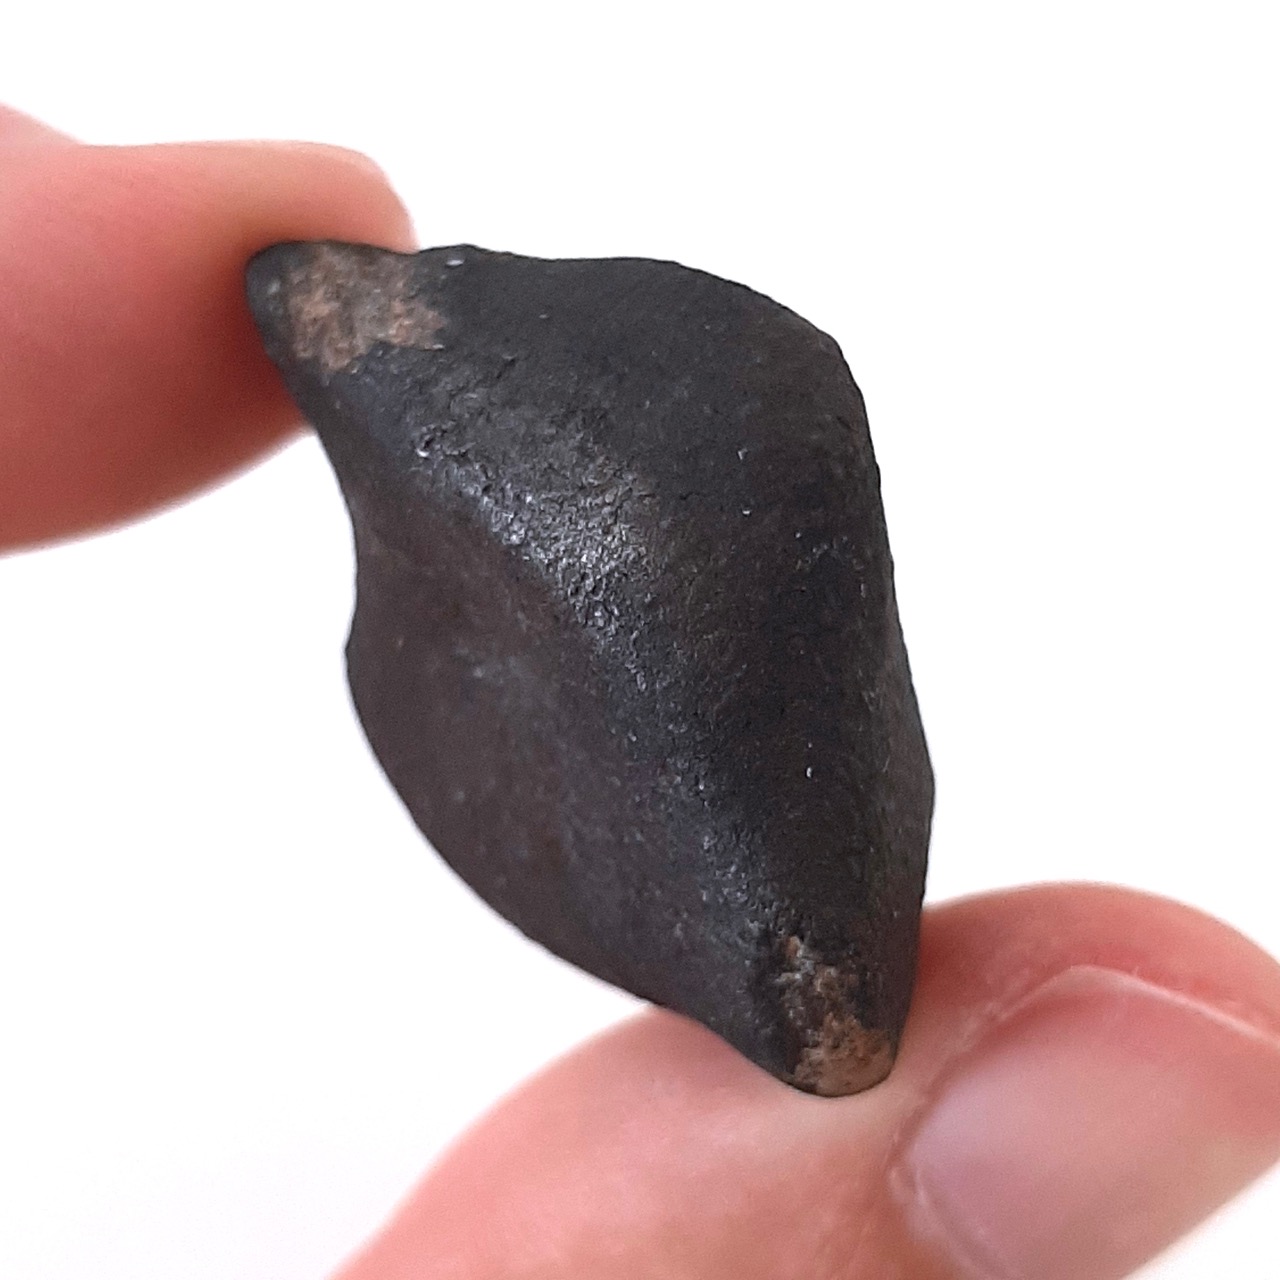 Juancheng meteorite. 95% crust and oriented shape.